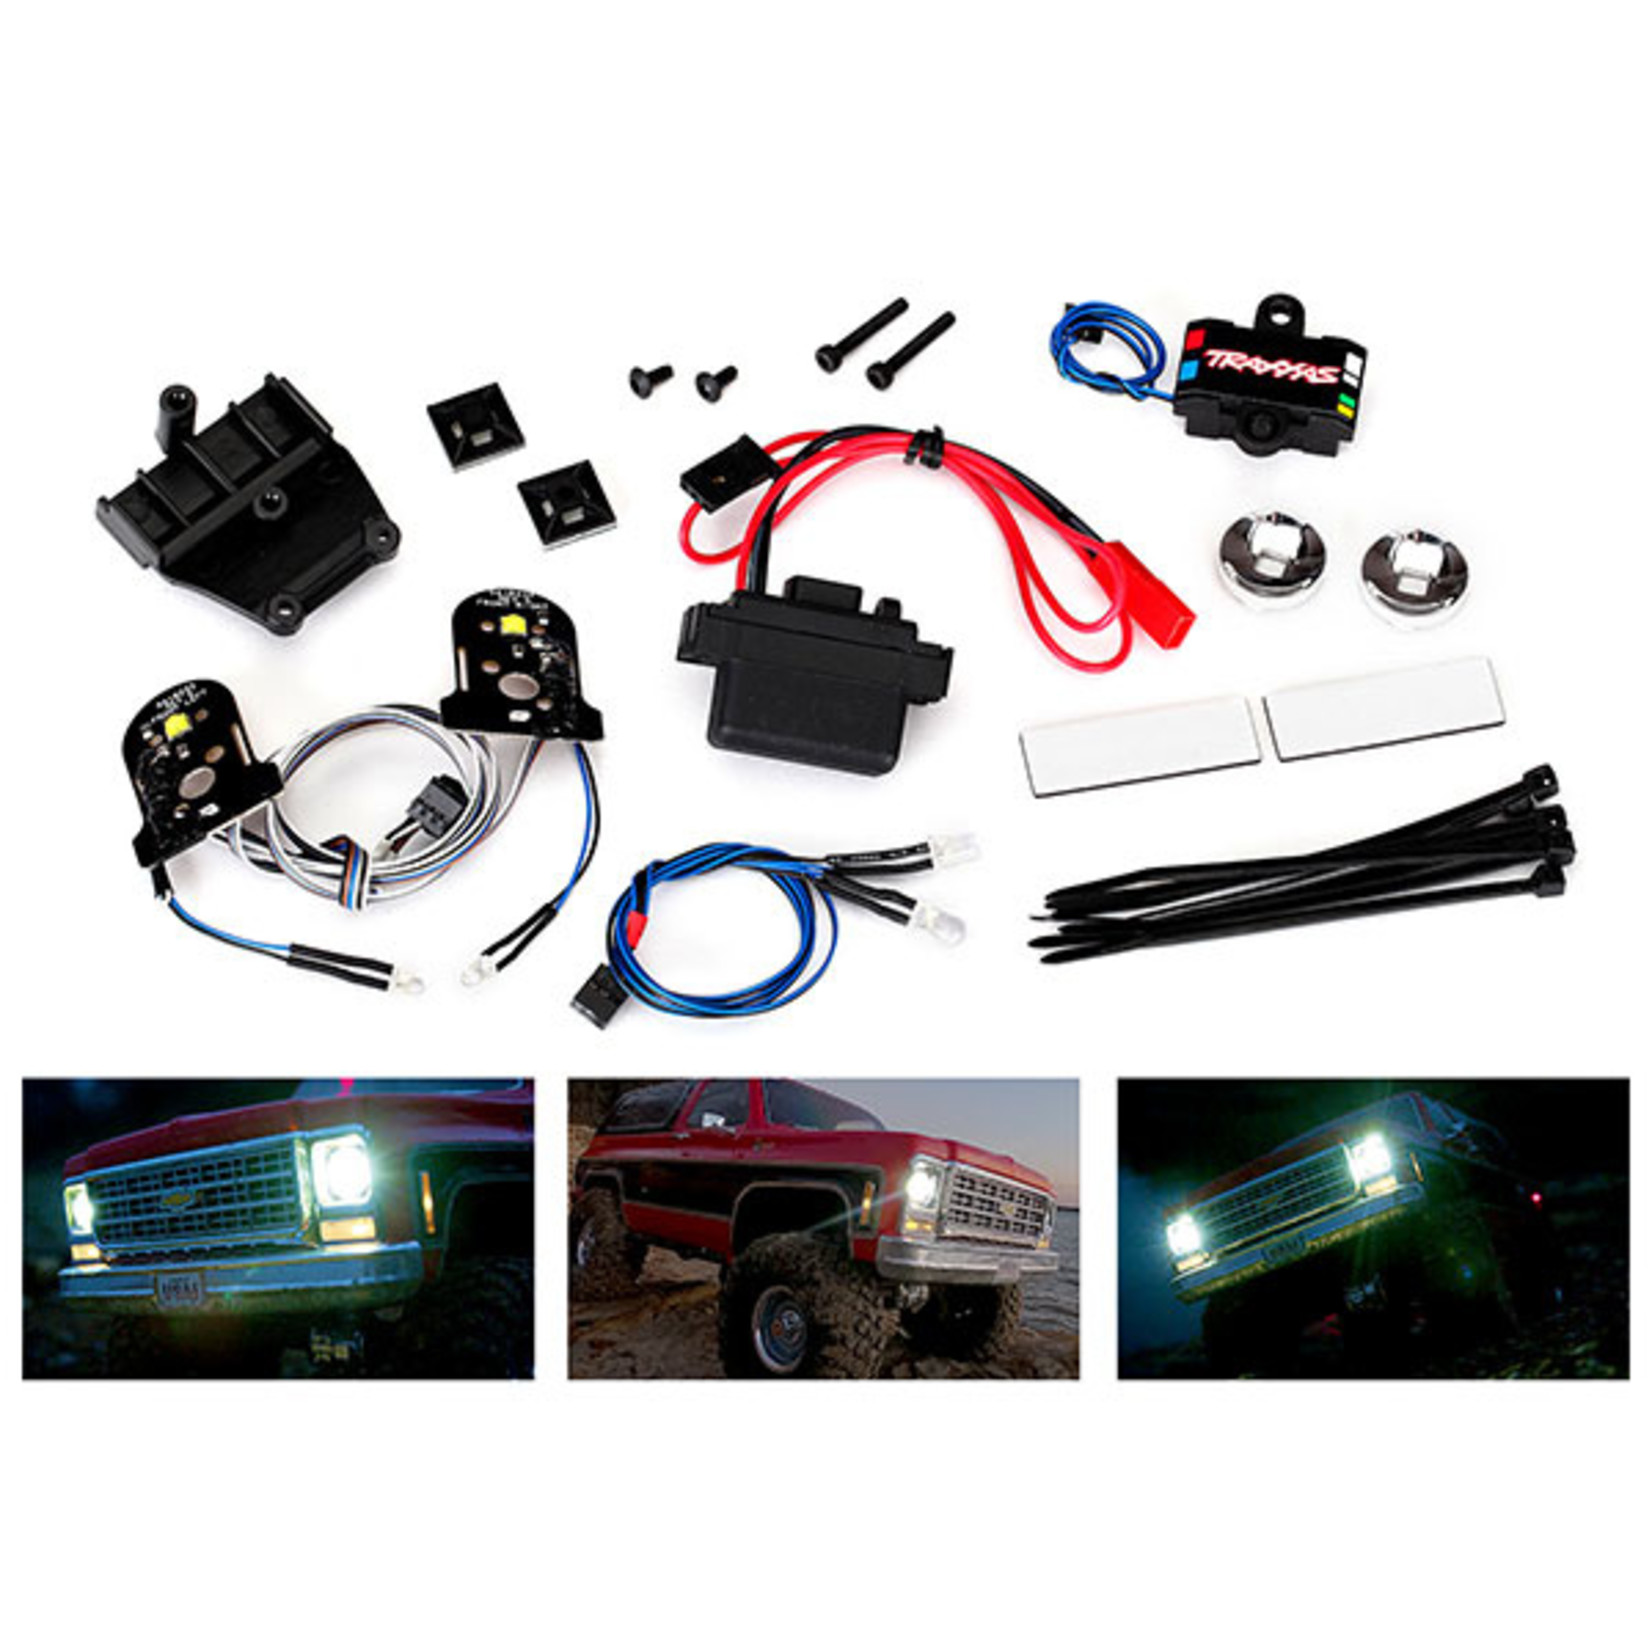 Traxxas 8038 - LED light set, complete with power supply (